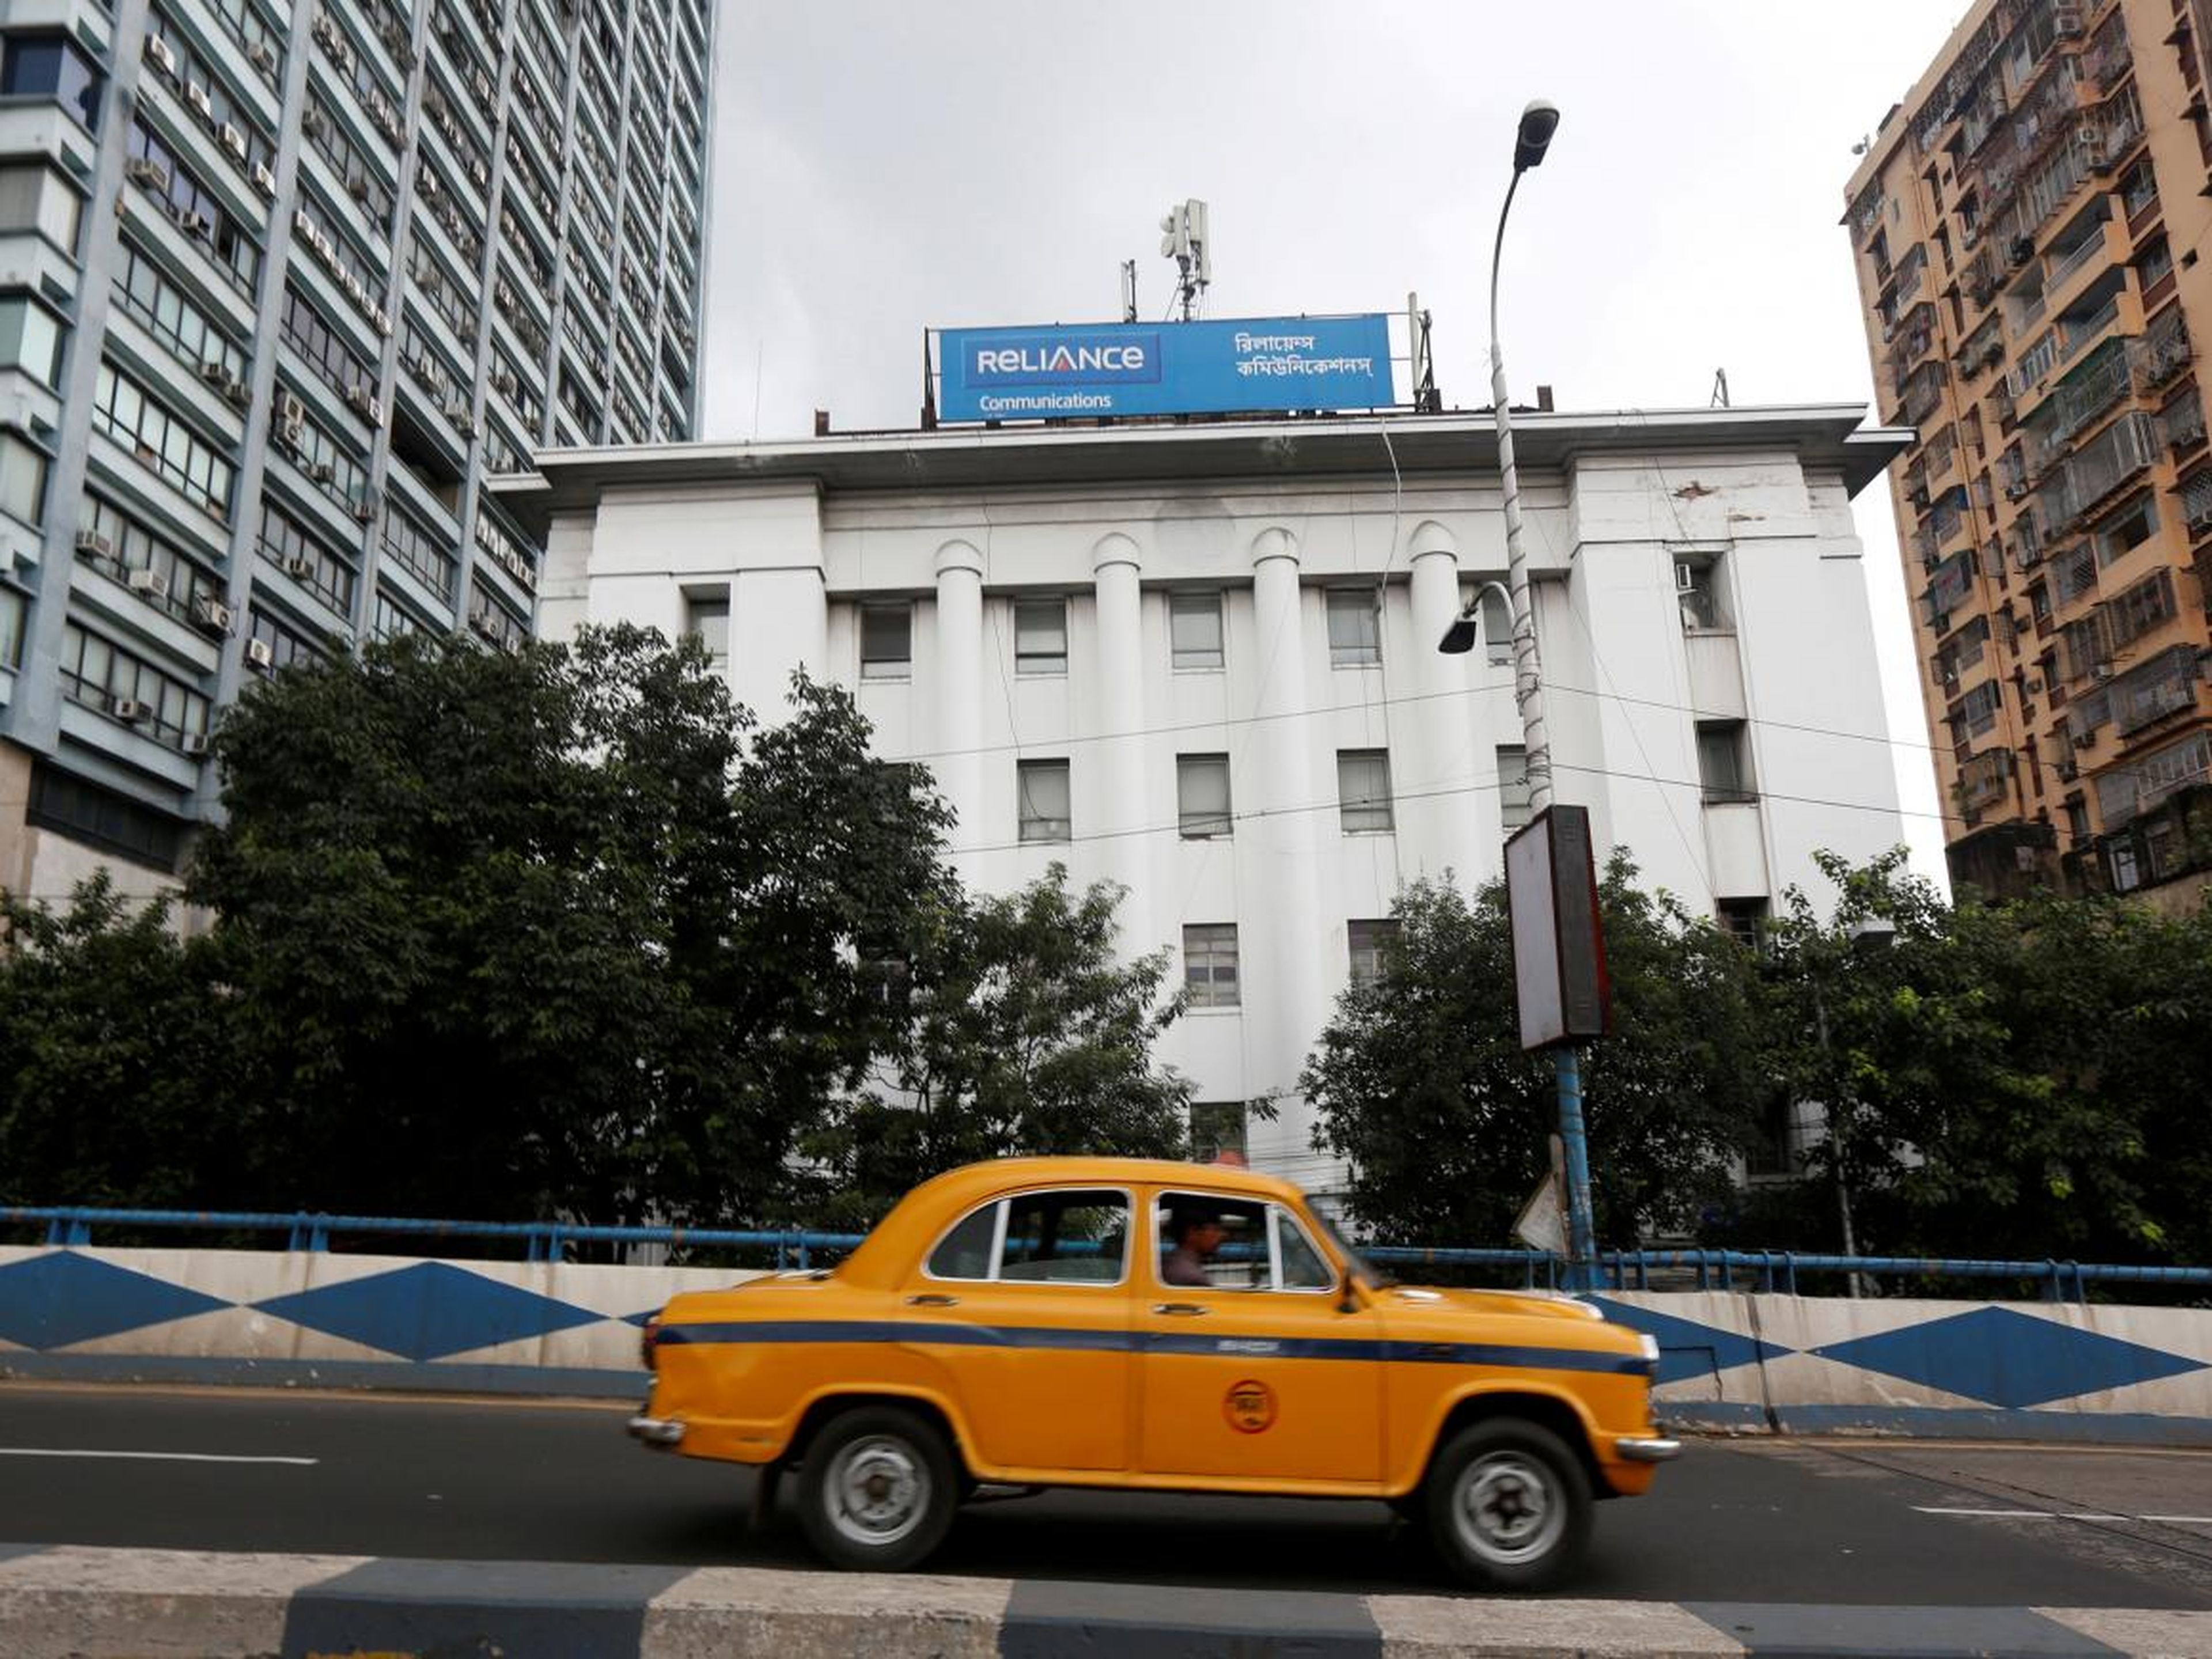 A taxi drives past a Reliance Communications building in Kolkata, India.